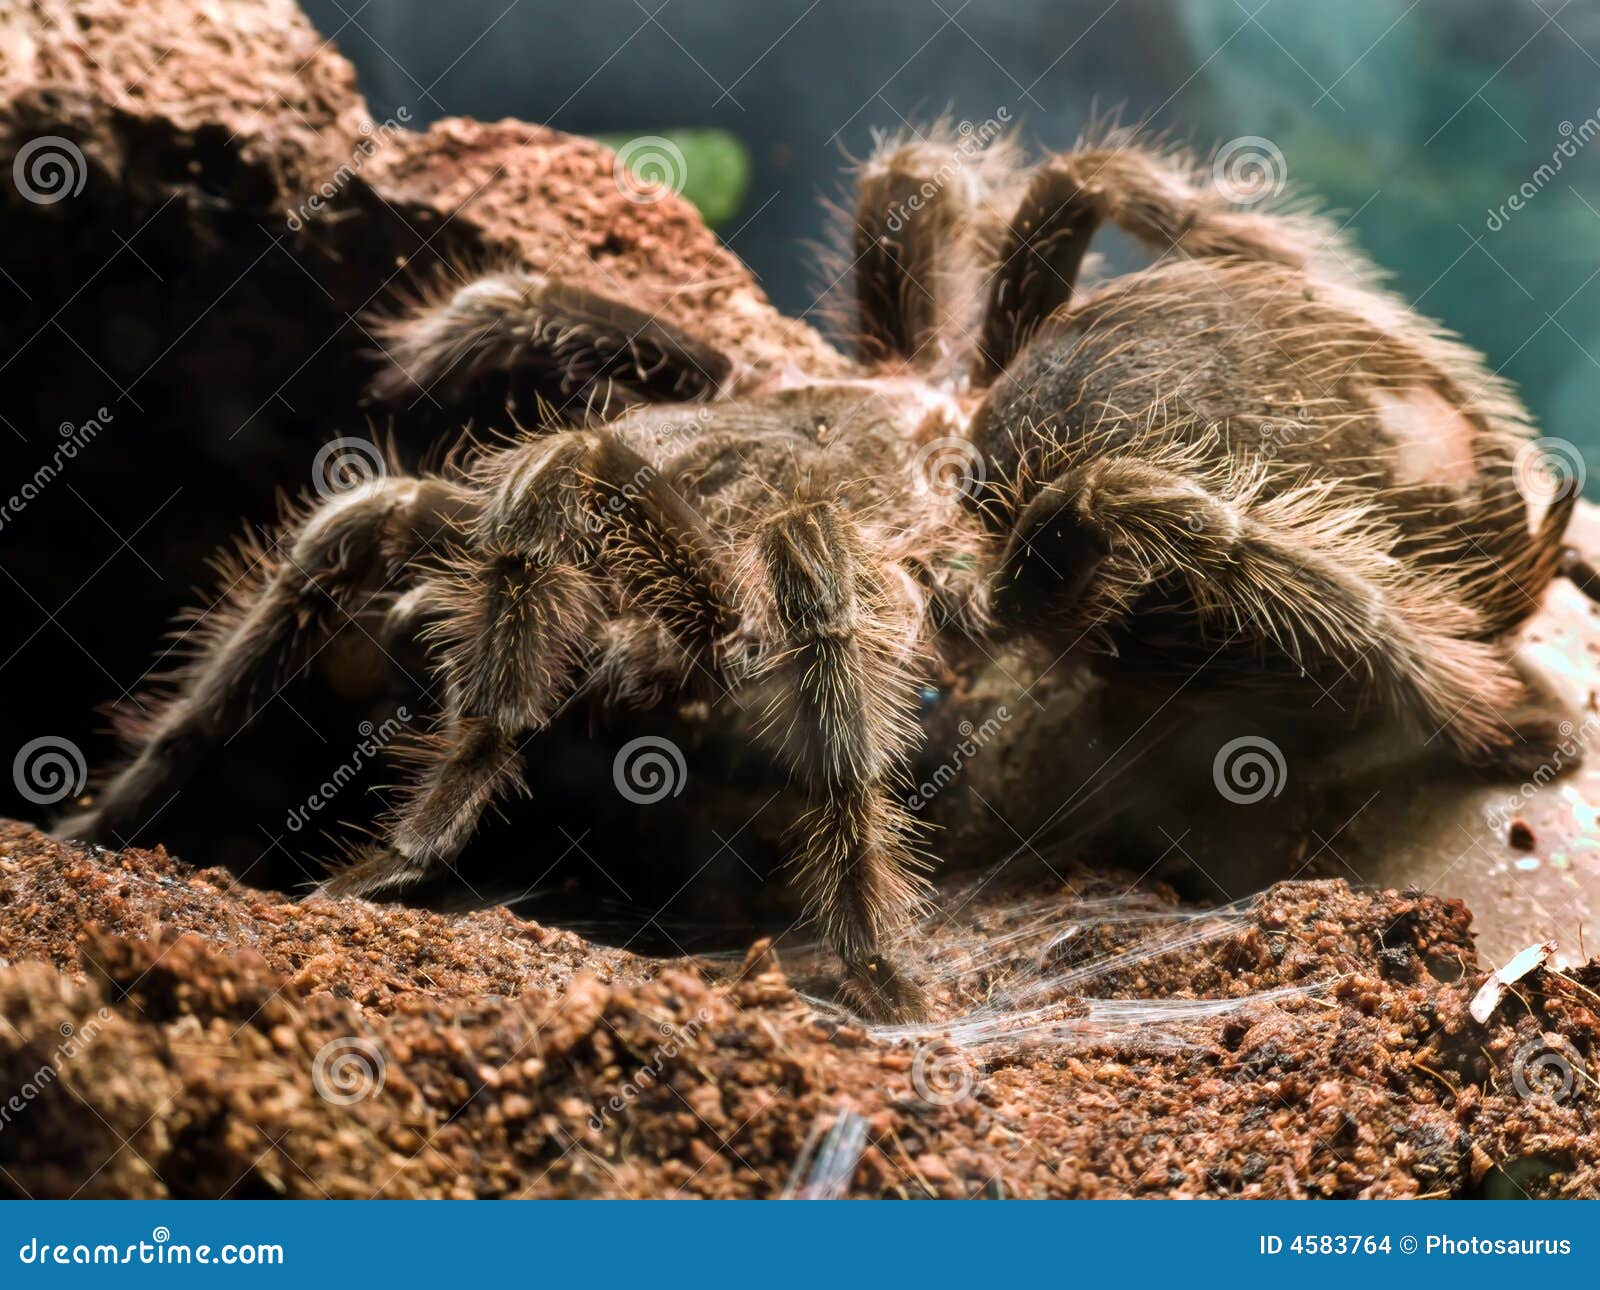 Bird eating spider stock photo. Image of giant, spiders - 4583764